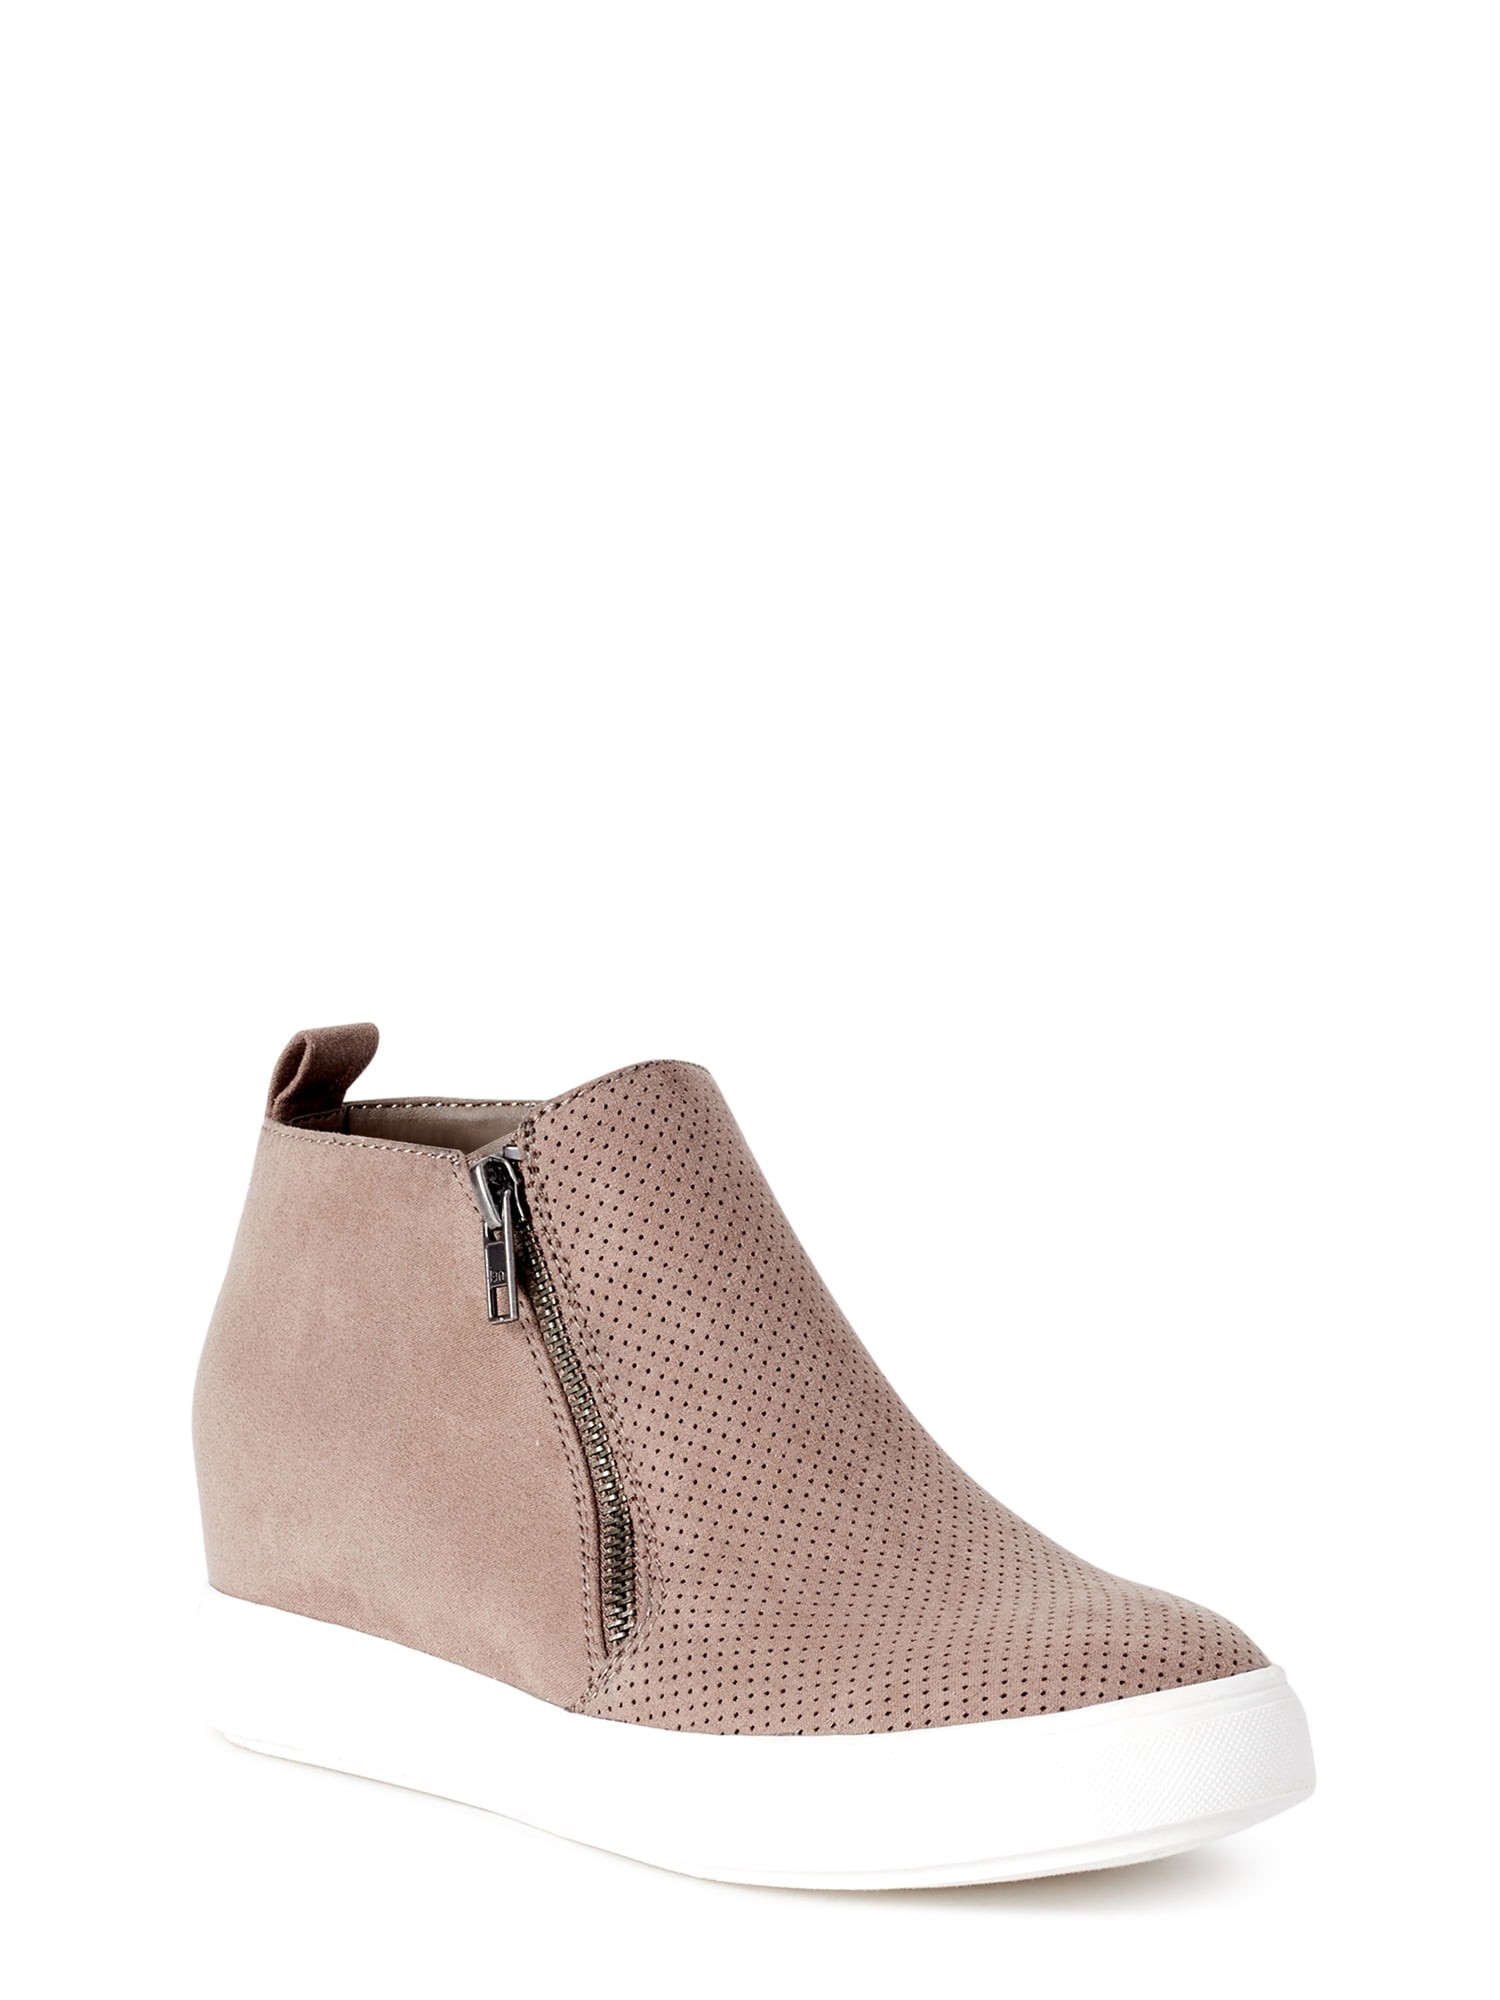 Time and Tru Sneaker Wedge Bootie 